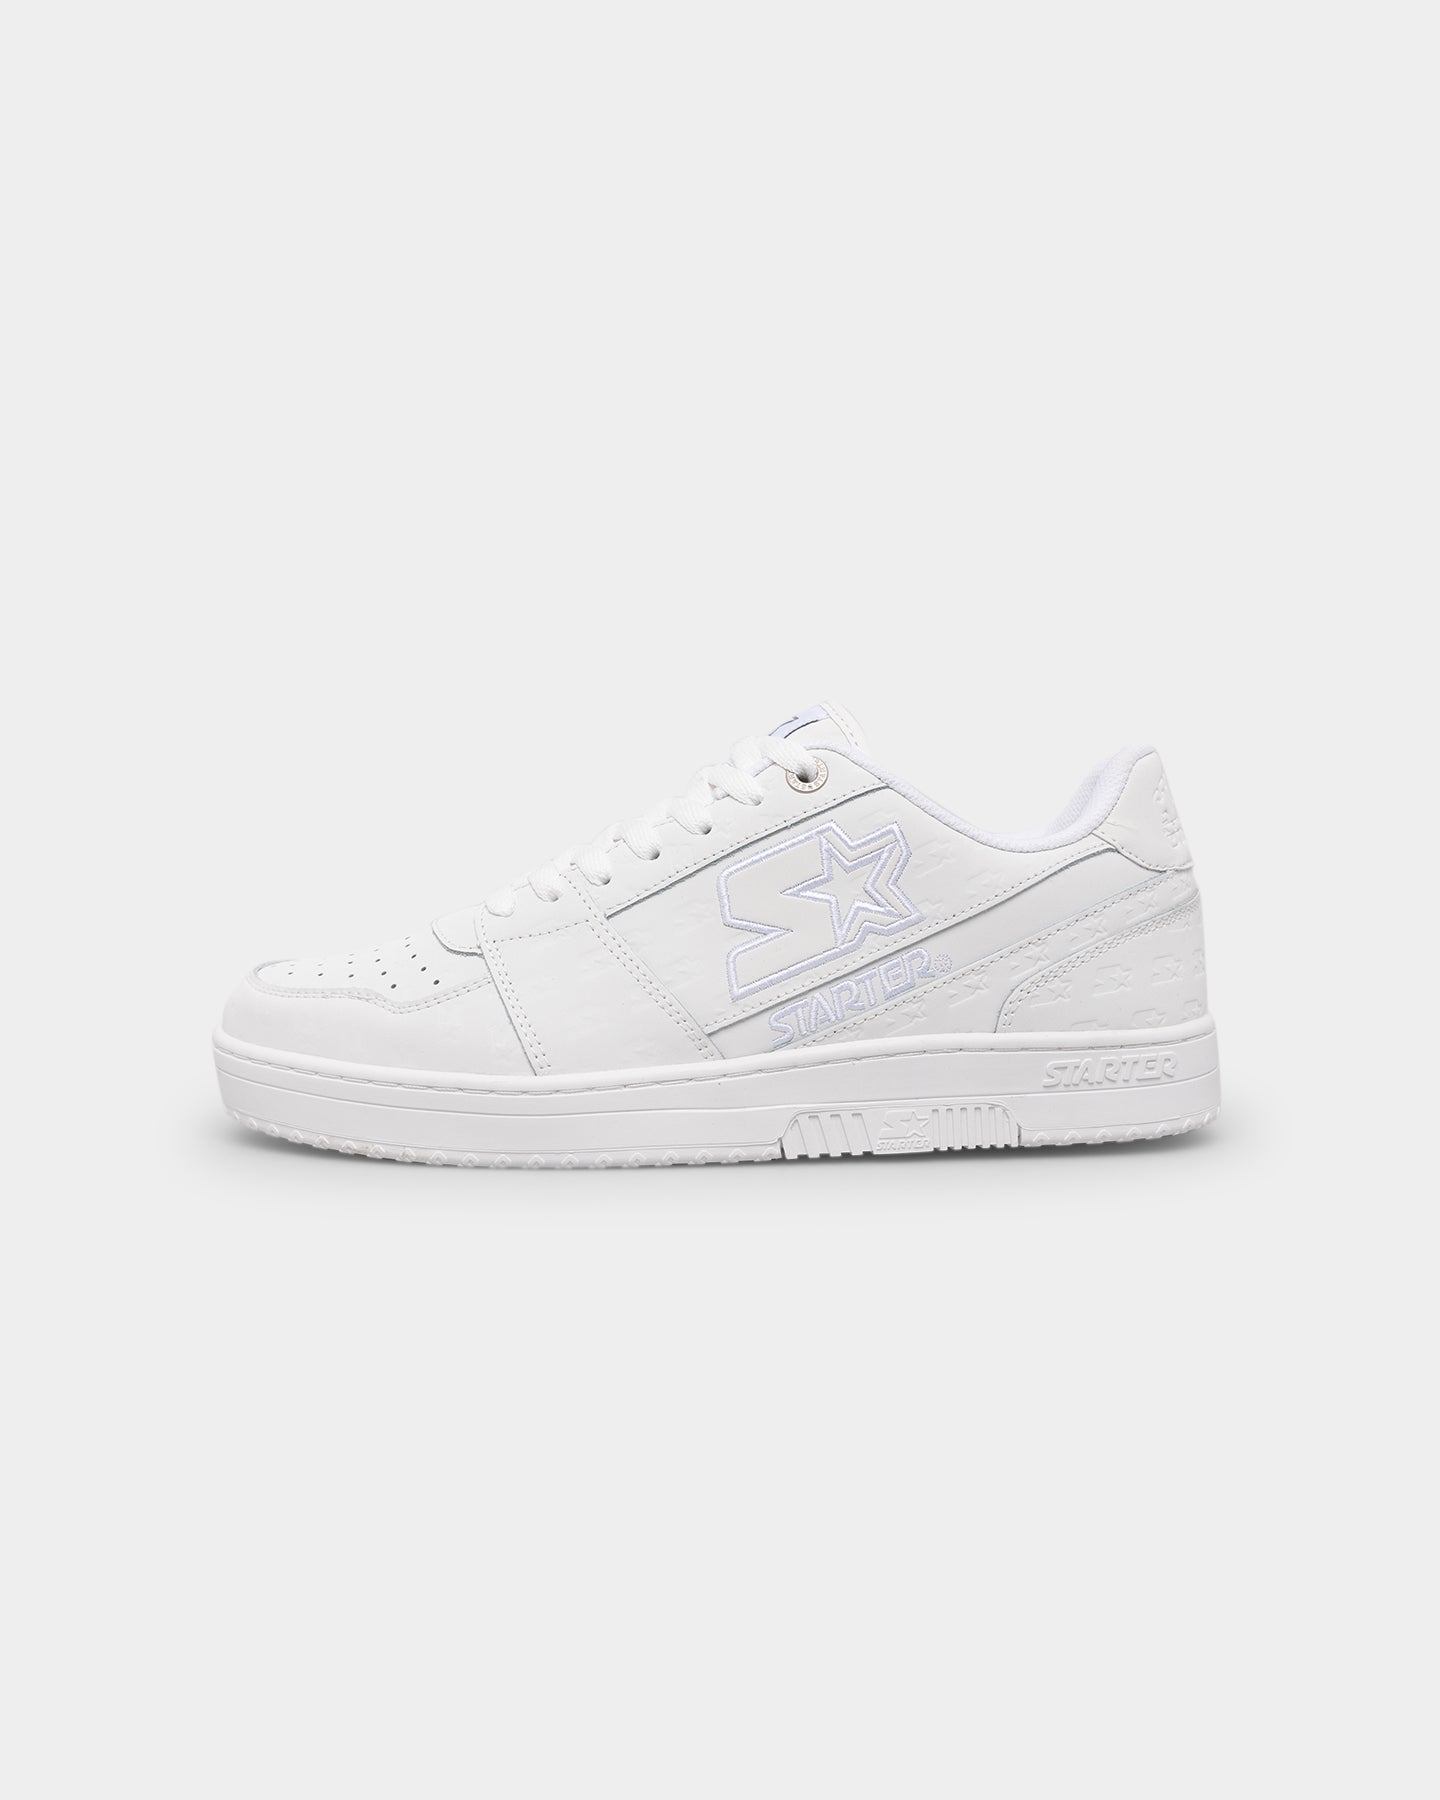 Starter S5 Low White/White | Culture Kings NZ